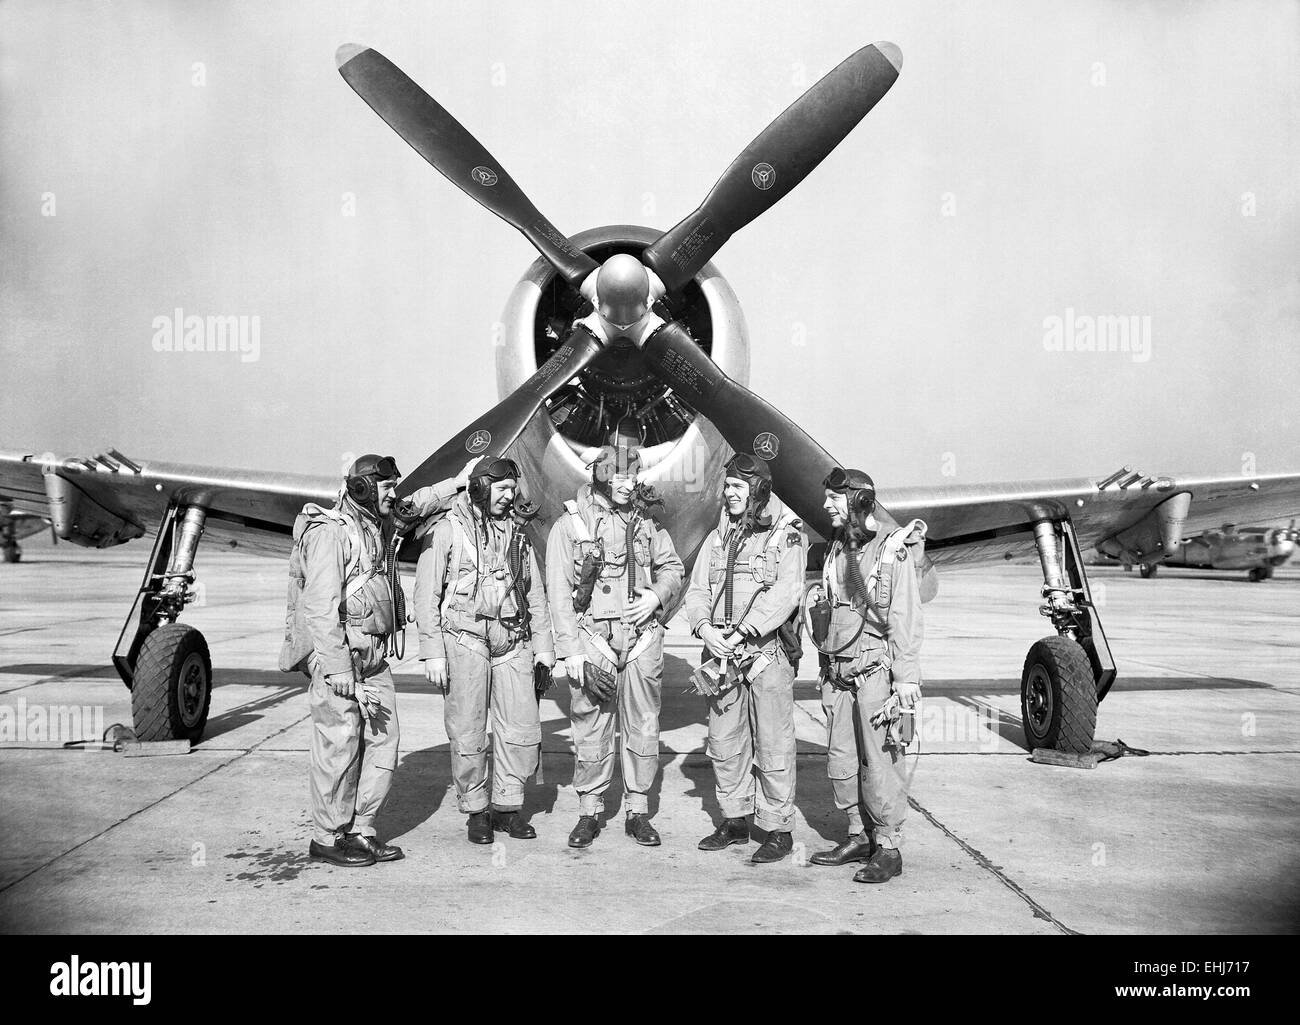 NACA photo, test pilots (from left) Mel Gough, Herb Hoover, Jack Reeder, Steve Cavallo and Bill Gray stand in front of a P-47 Thunderbolt. Stock Photo